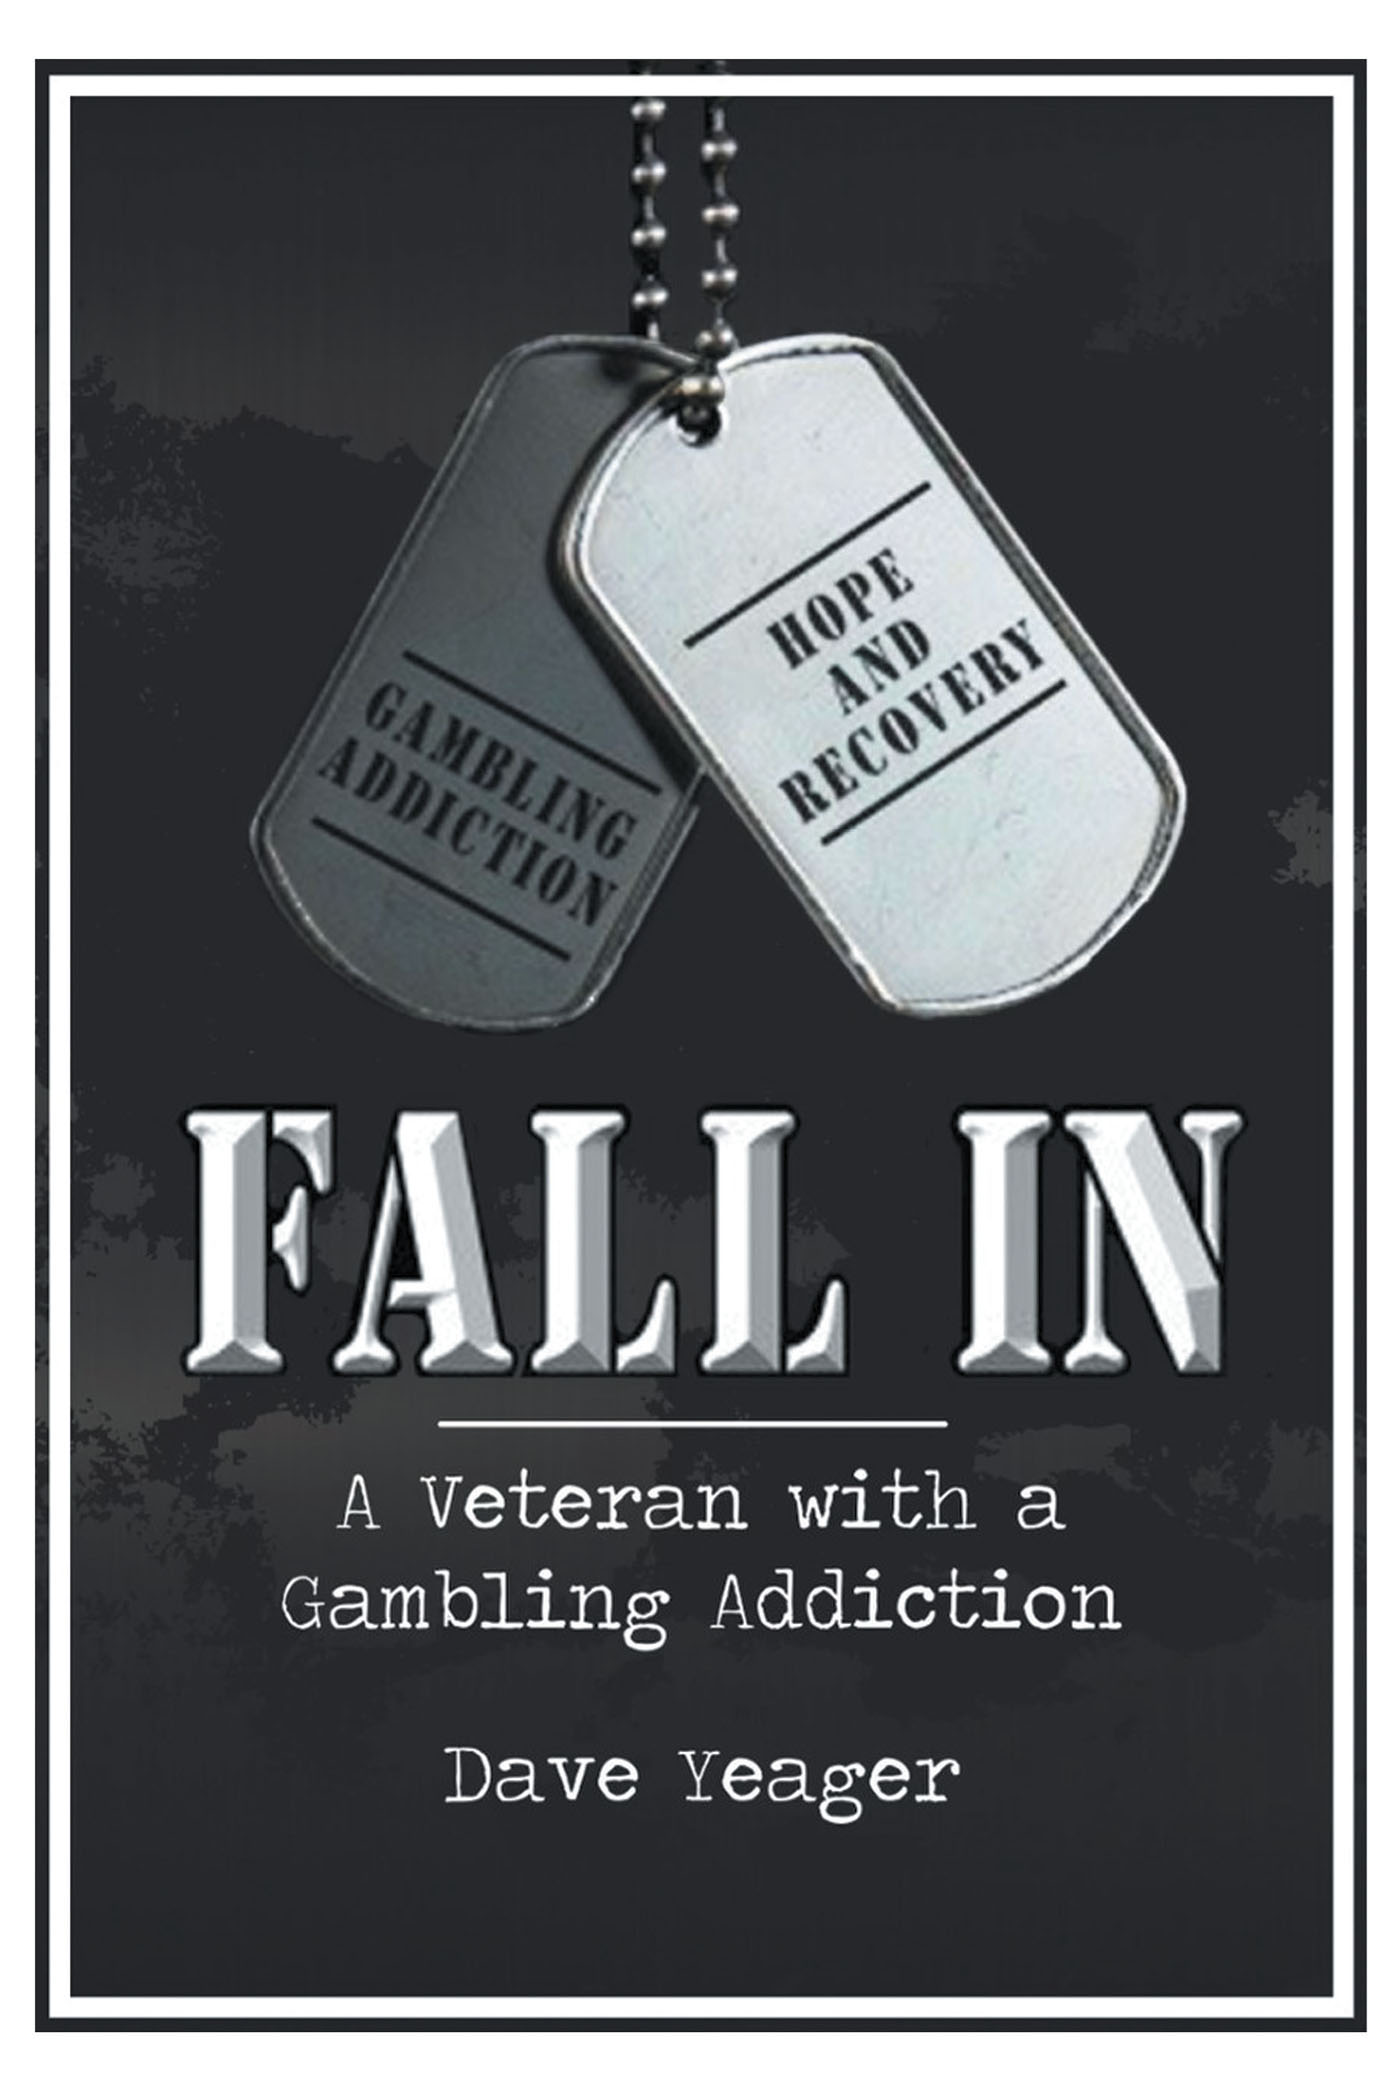 Dave Yeager’s New Book, “Fall In: A Veteran with a Gambling Addiction,” Documents the Author's Struggles with Gambling Addiction and How He Found Hope Through Recovery